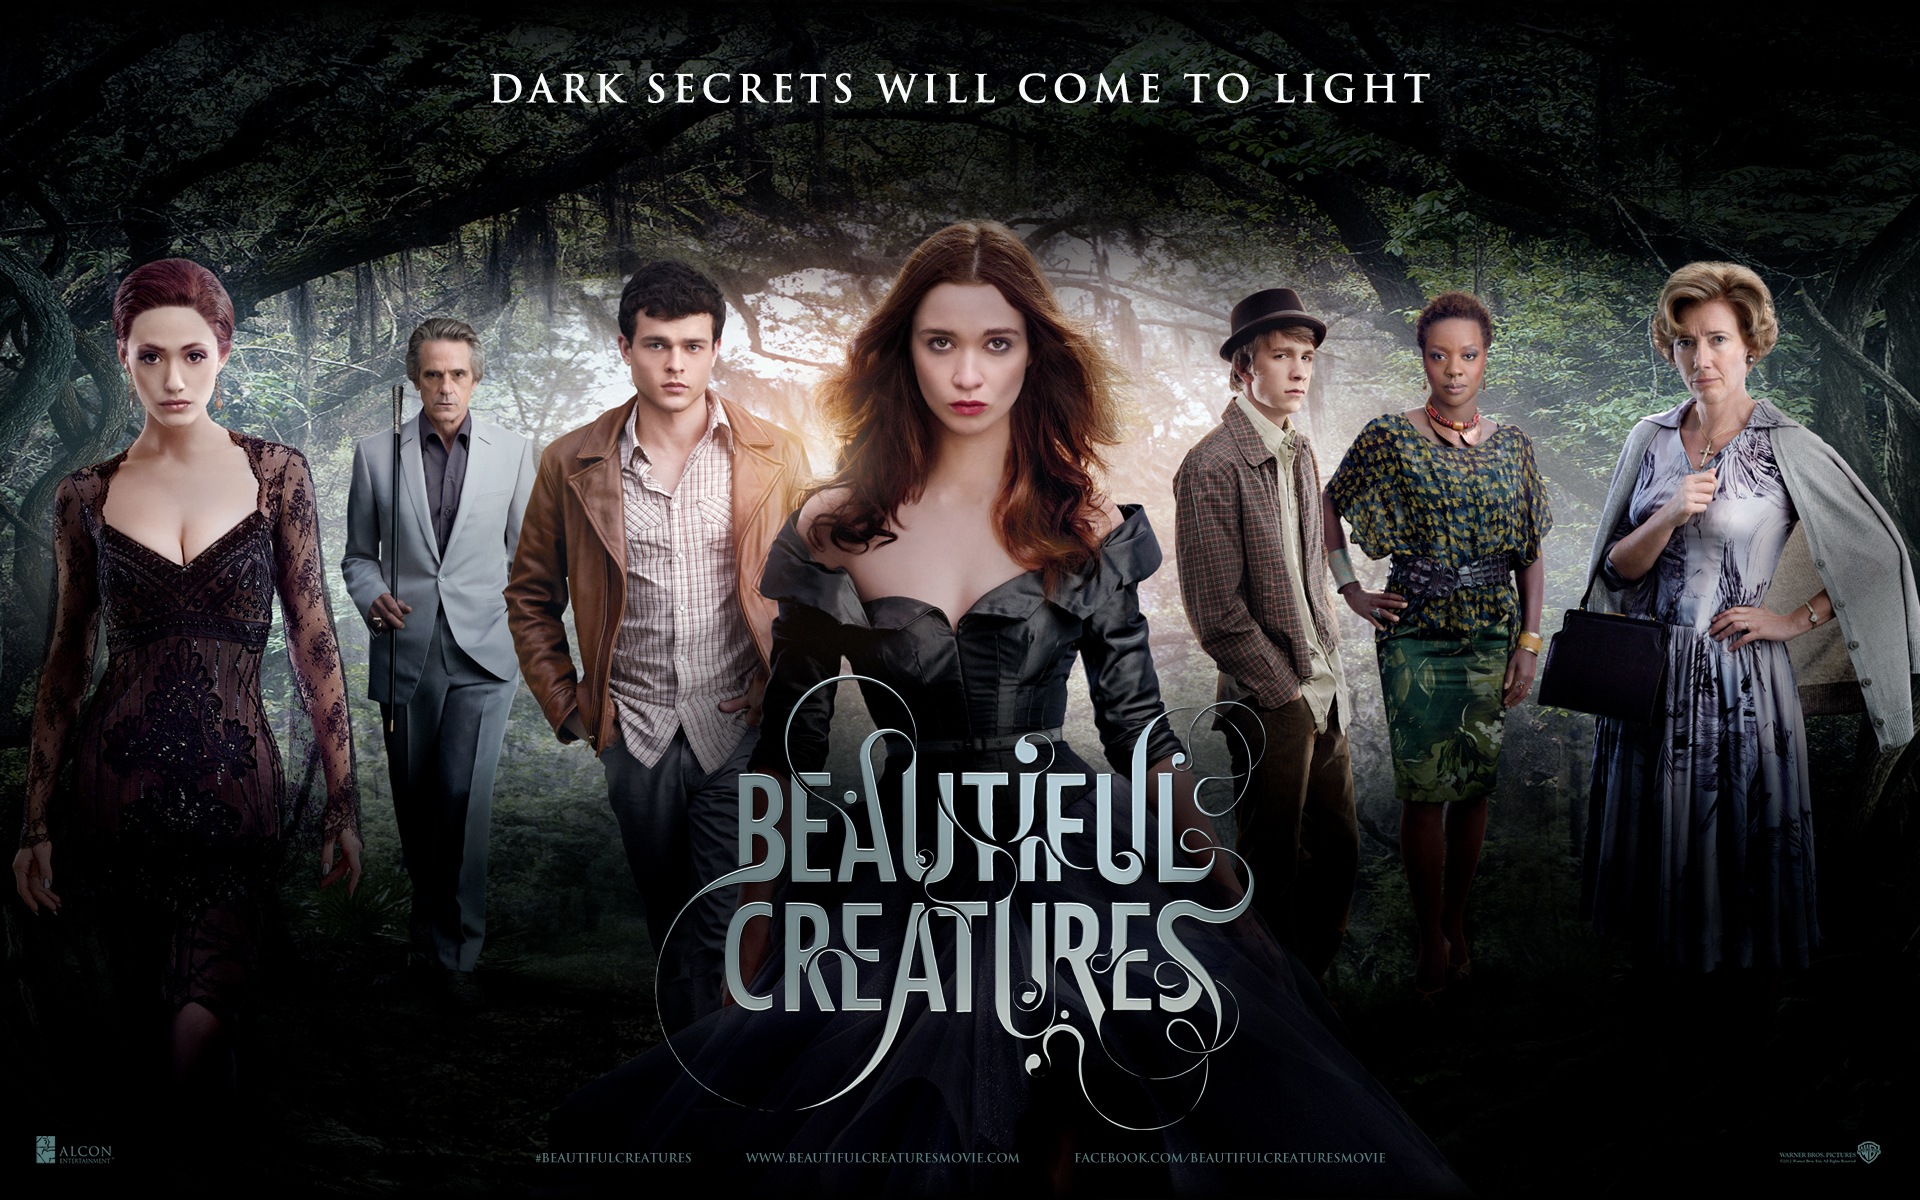 Beautiful Creatures 2013 HD movie wallpapers #1 - 1920x1200